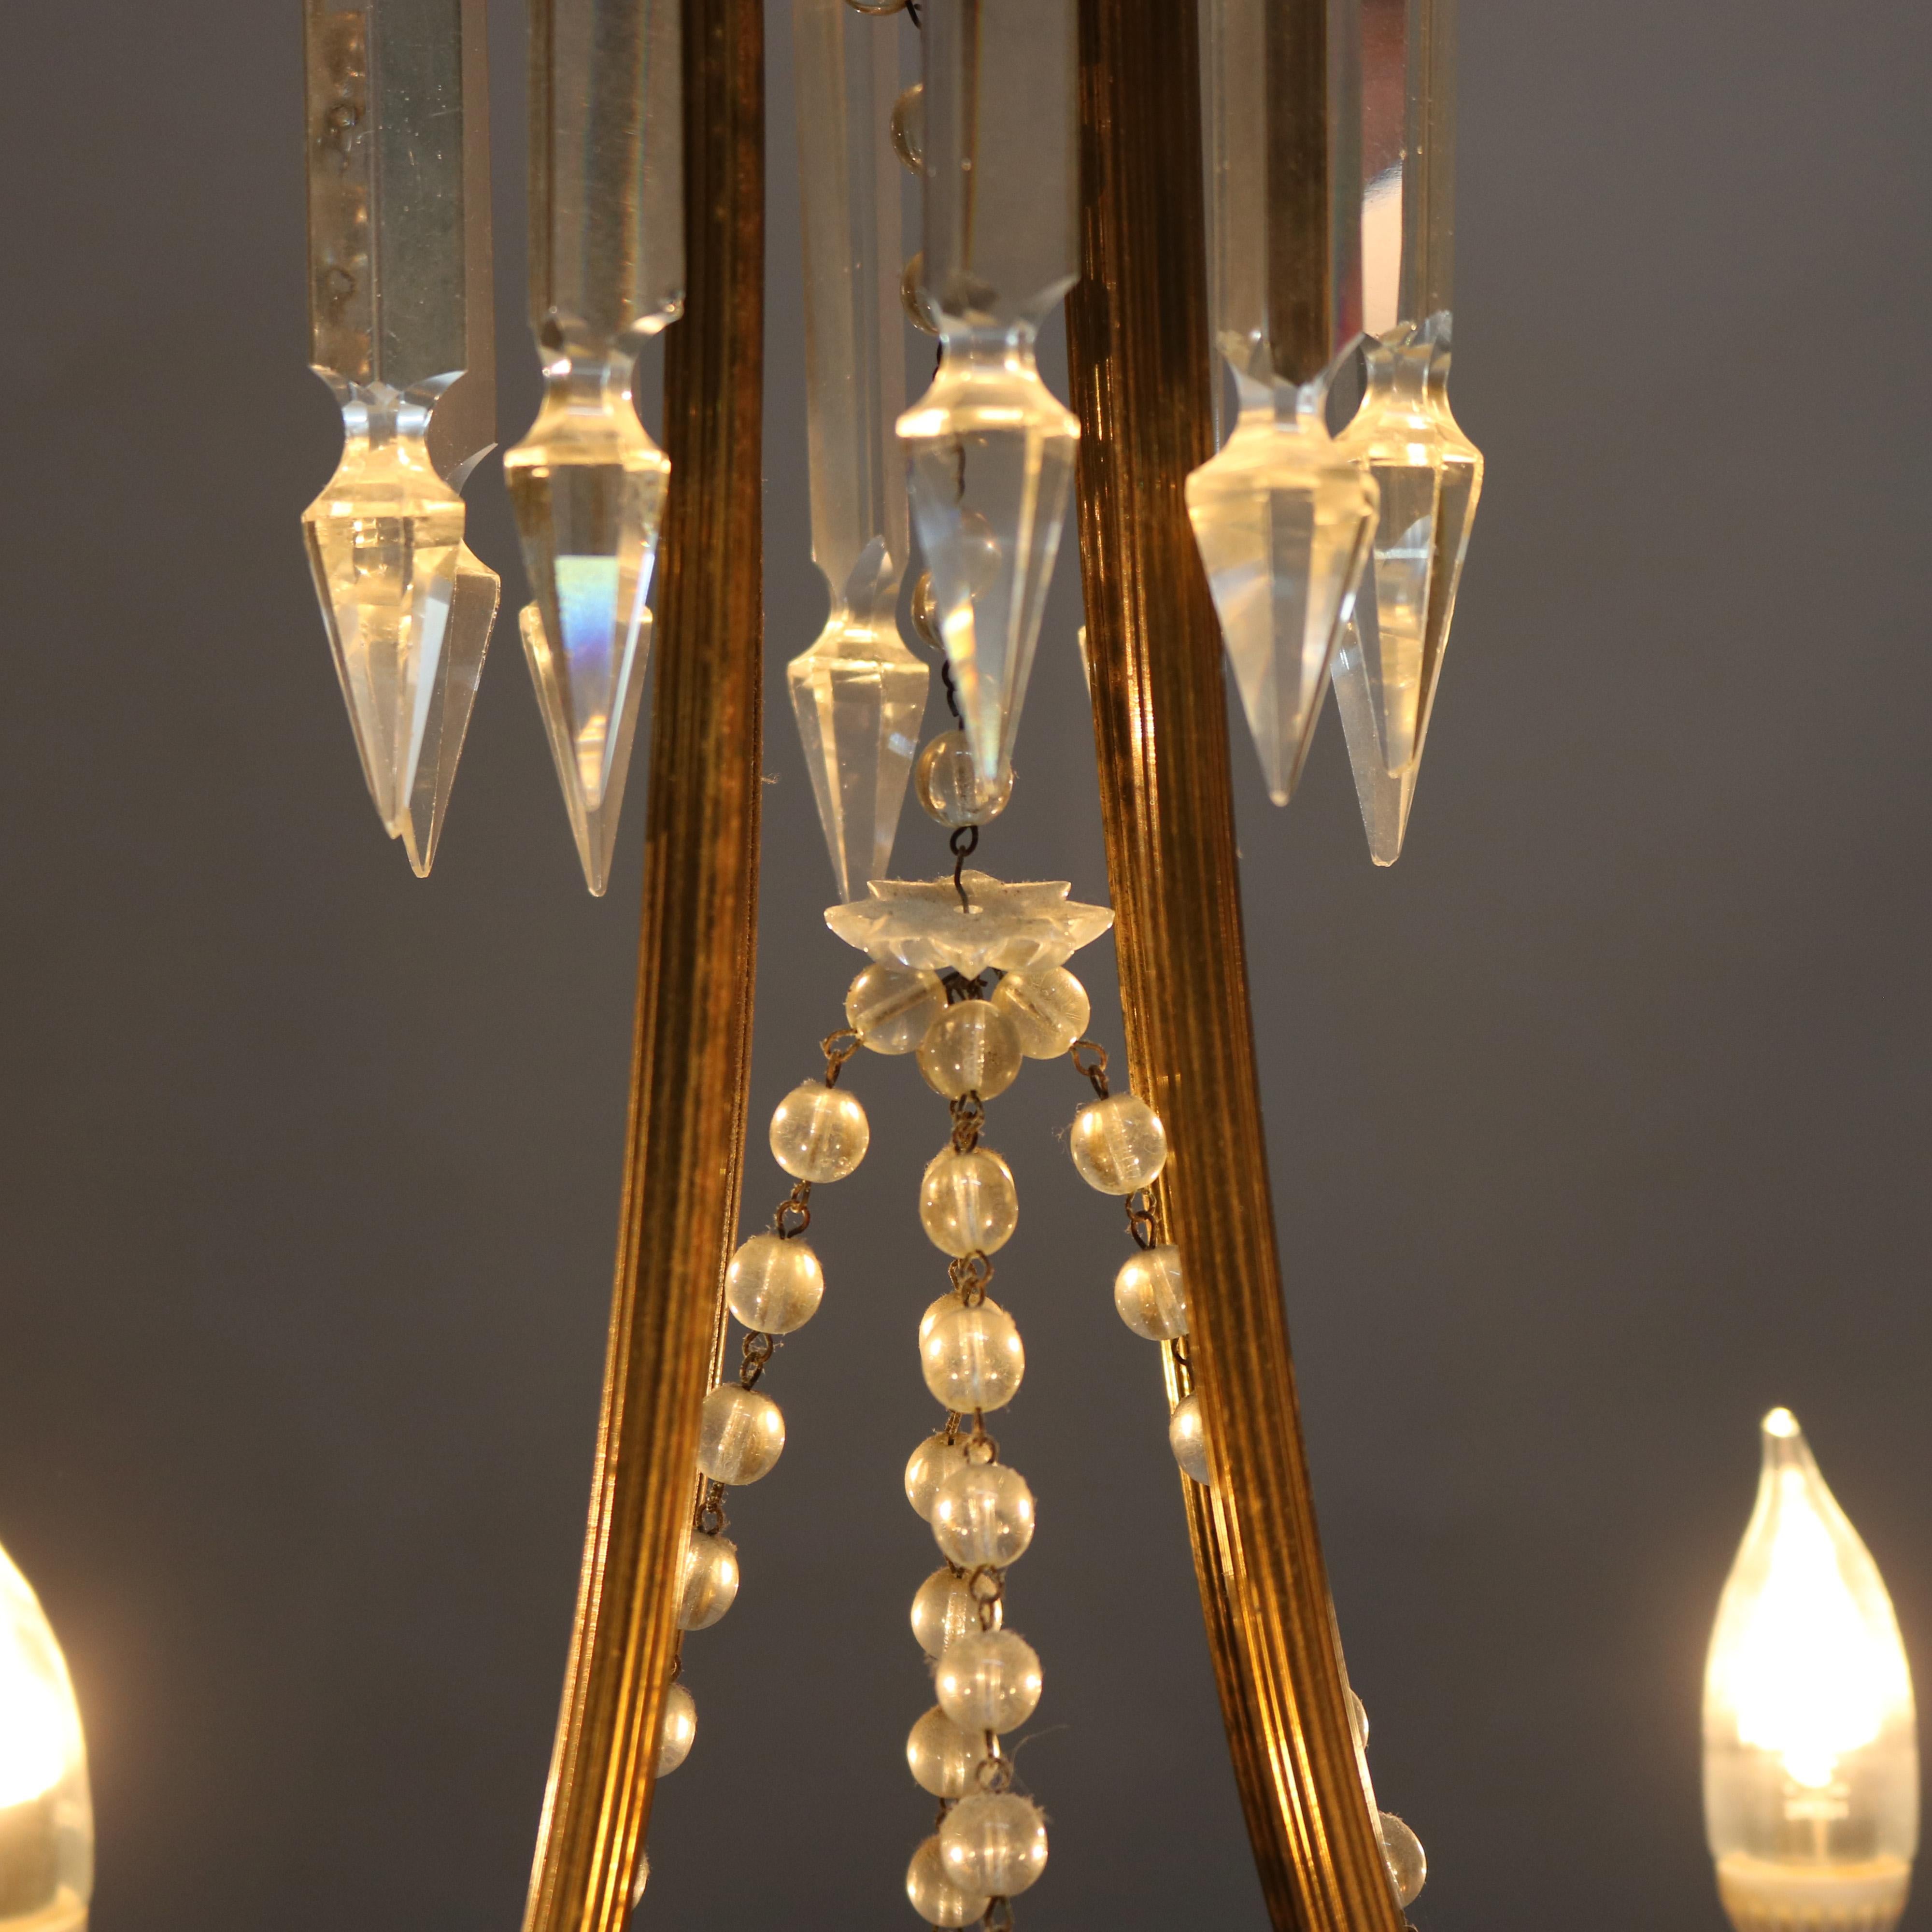 Antique French Style Bronzed Four-Light Chandelier with Draped Crystals, c1920 In Good Condition For Sale In Big Flats, NY